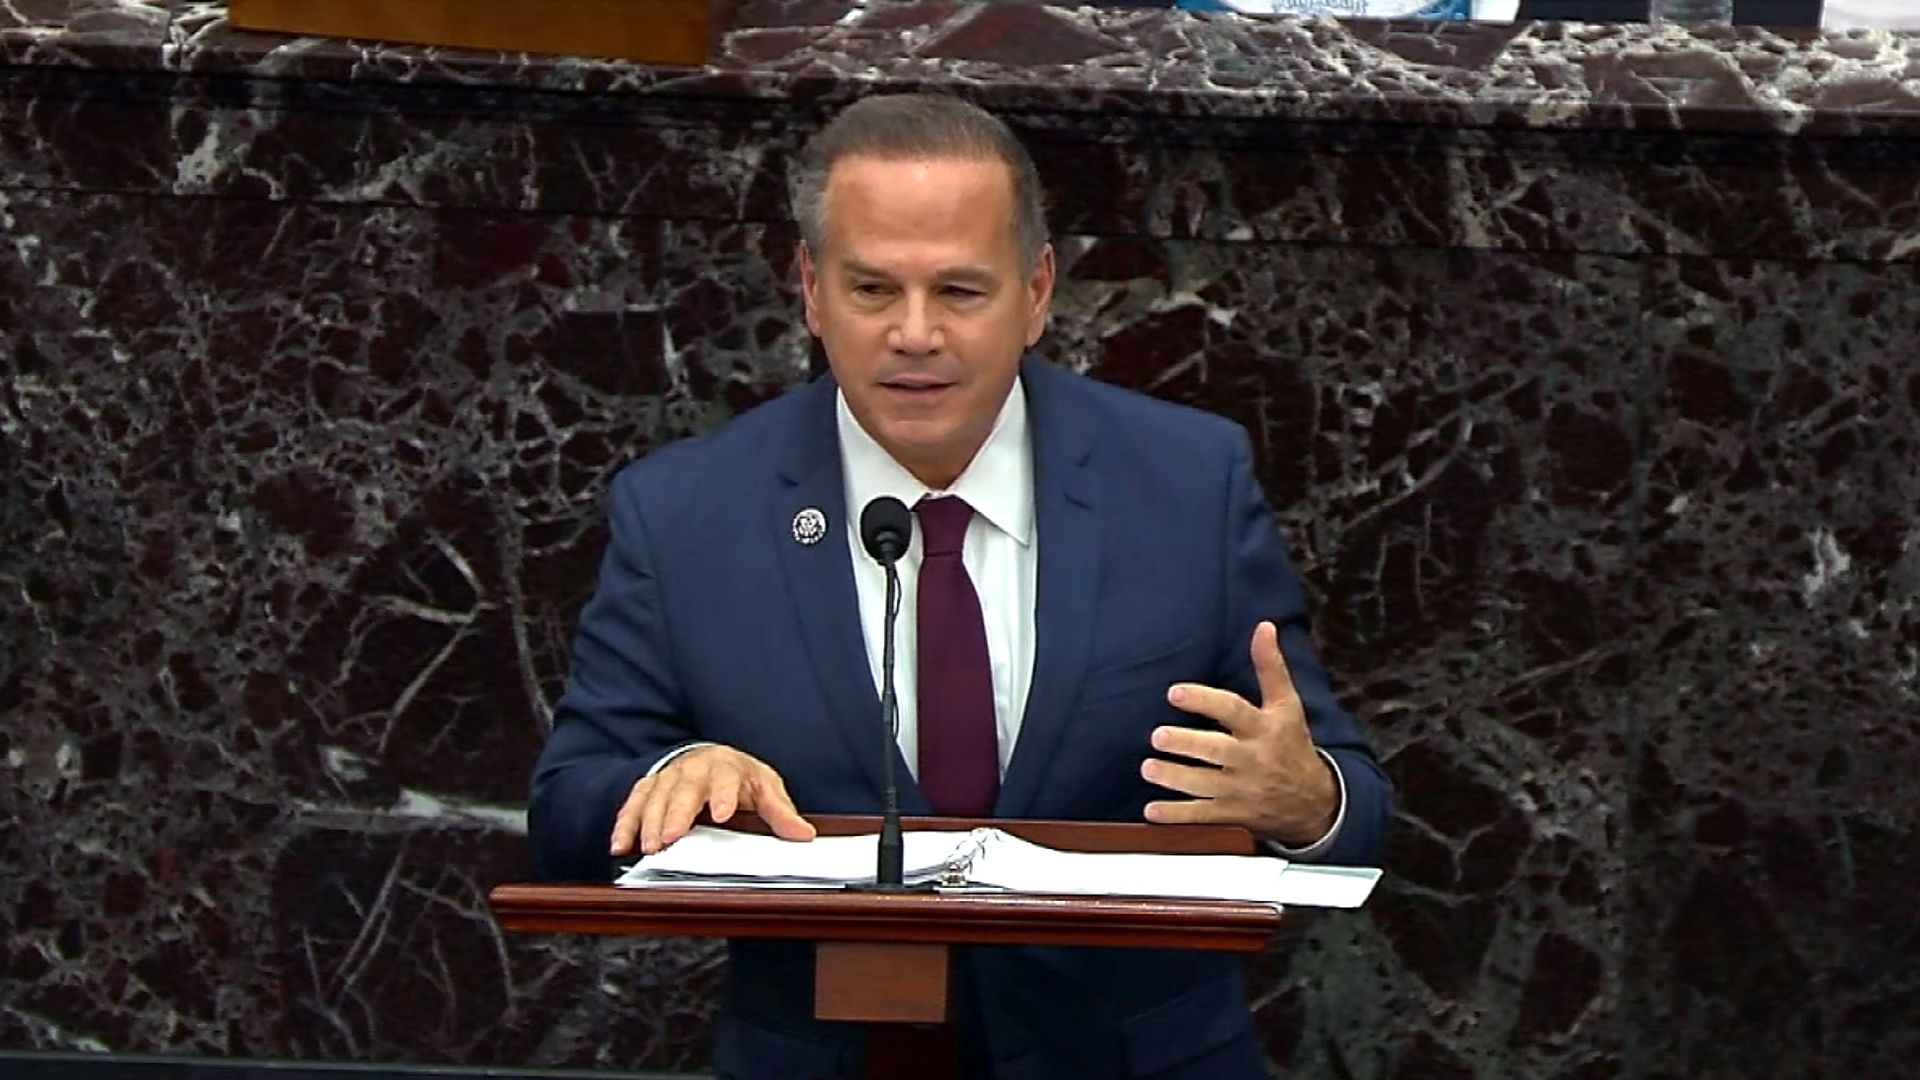 House Impeachment manager Rep. David Cicilline (D-RI) speaks on the fifth day of Trump's second impeachment trial at the U.S. Capitol on February 13